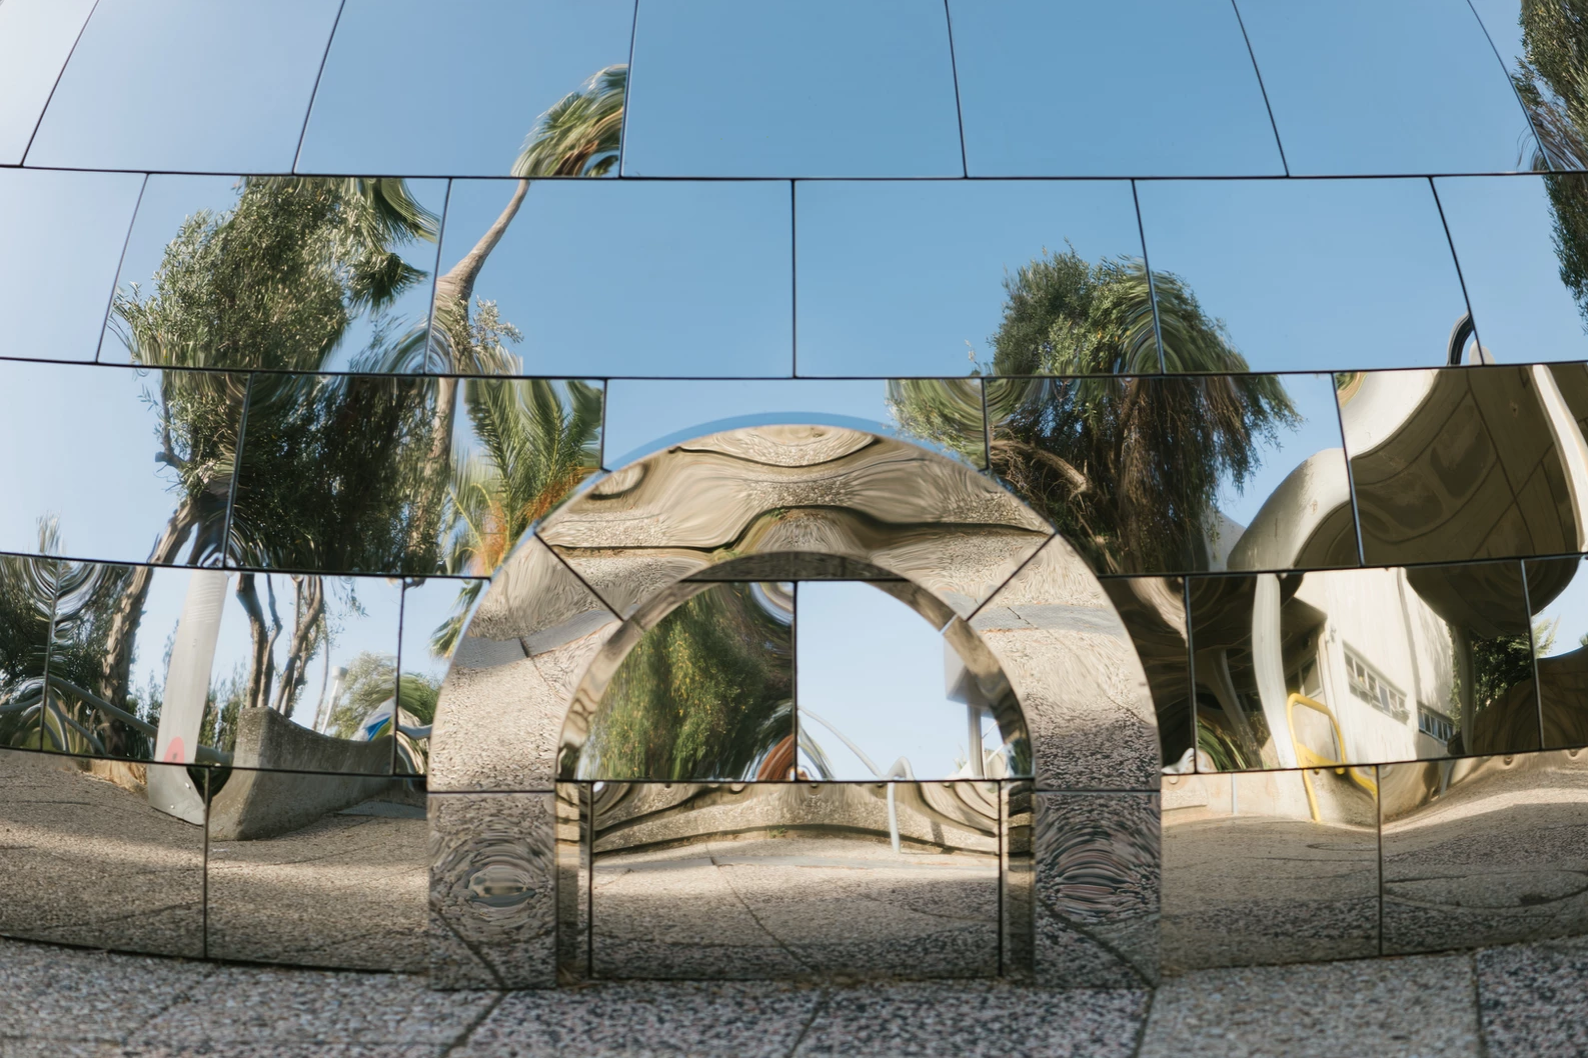 Magenta Workshop builds a mirrored igloo in sunny Tel Aviv for the city's first Craft and Design Biennale